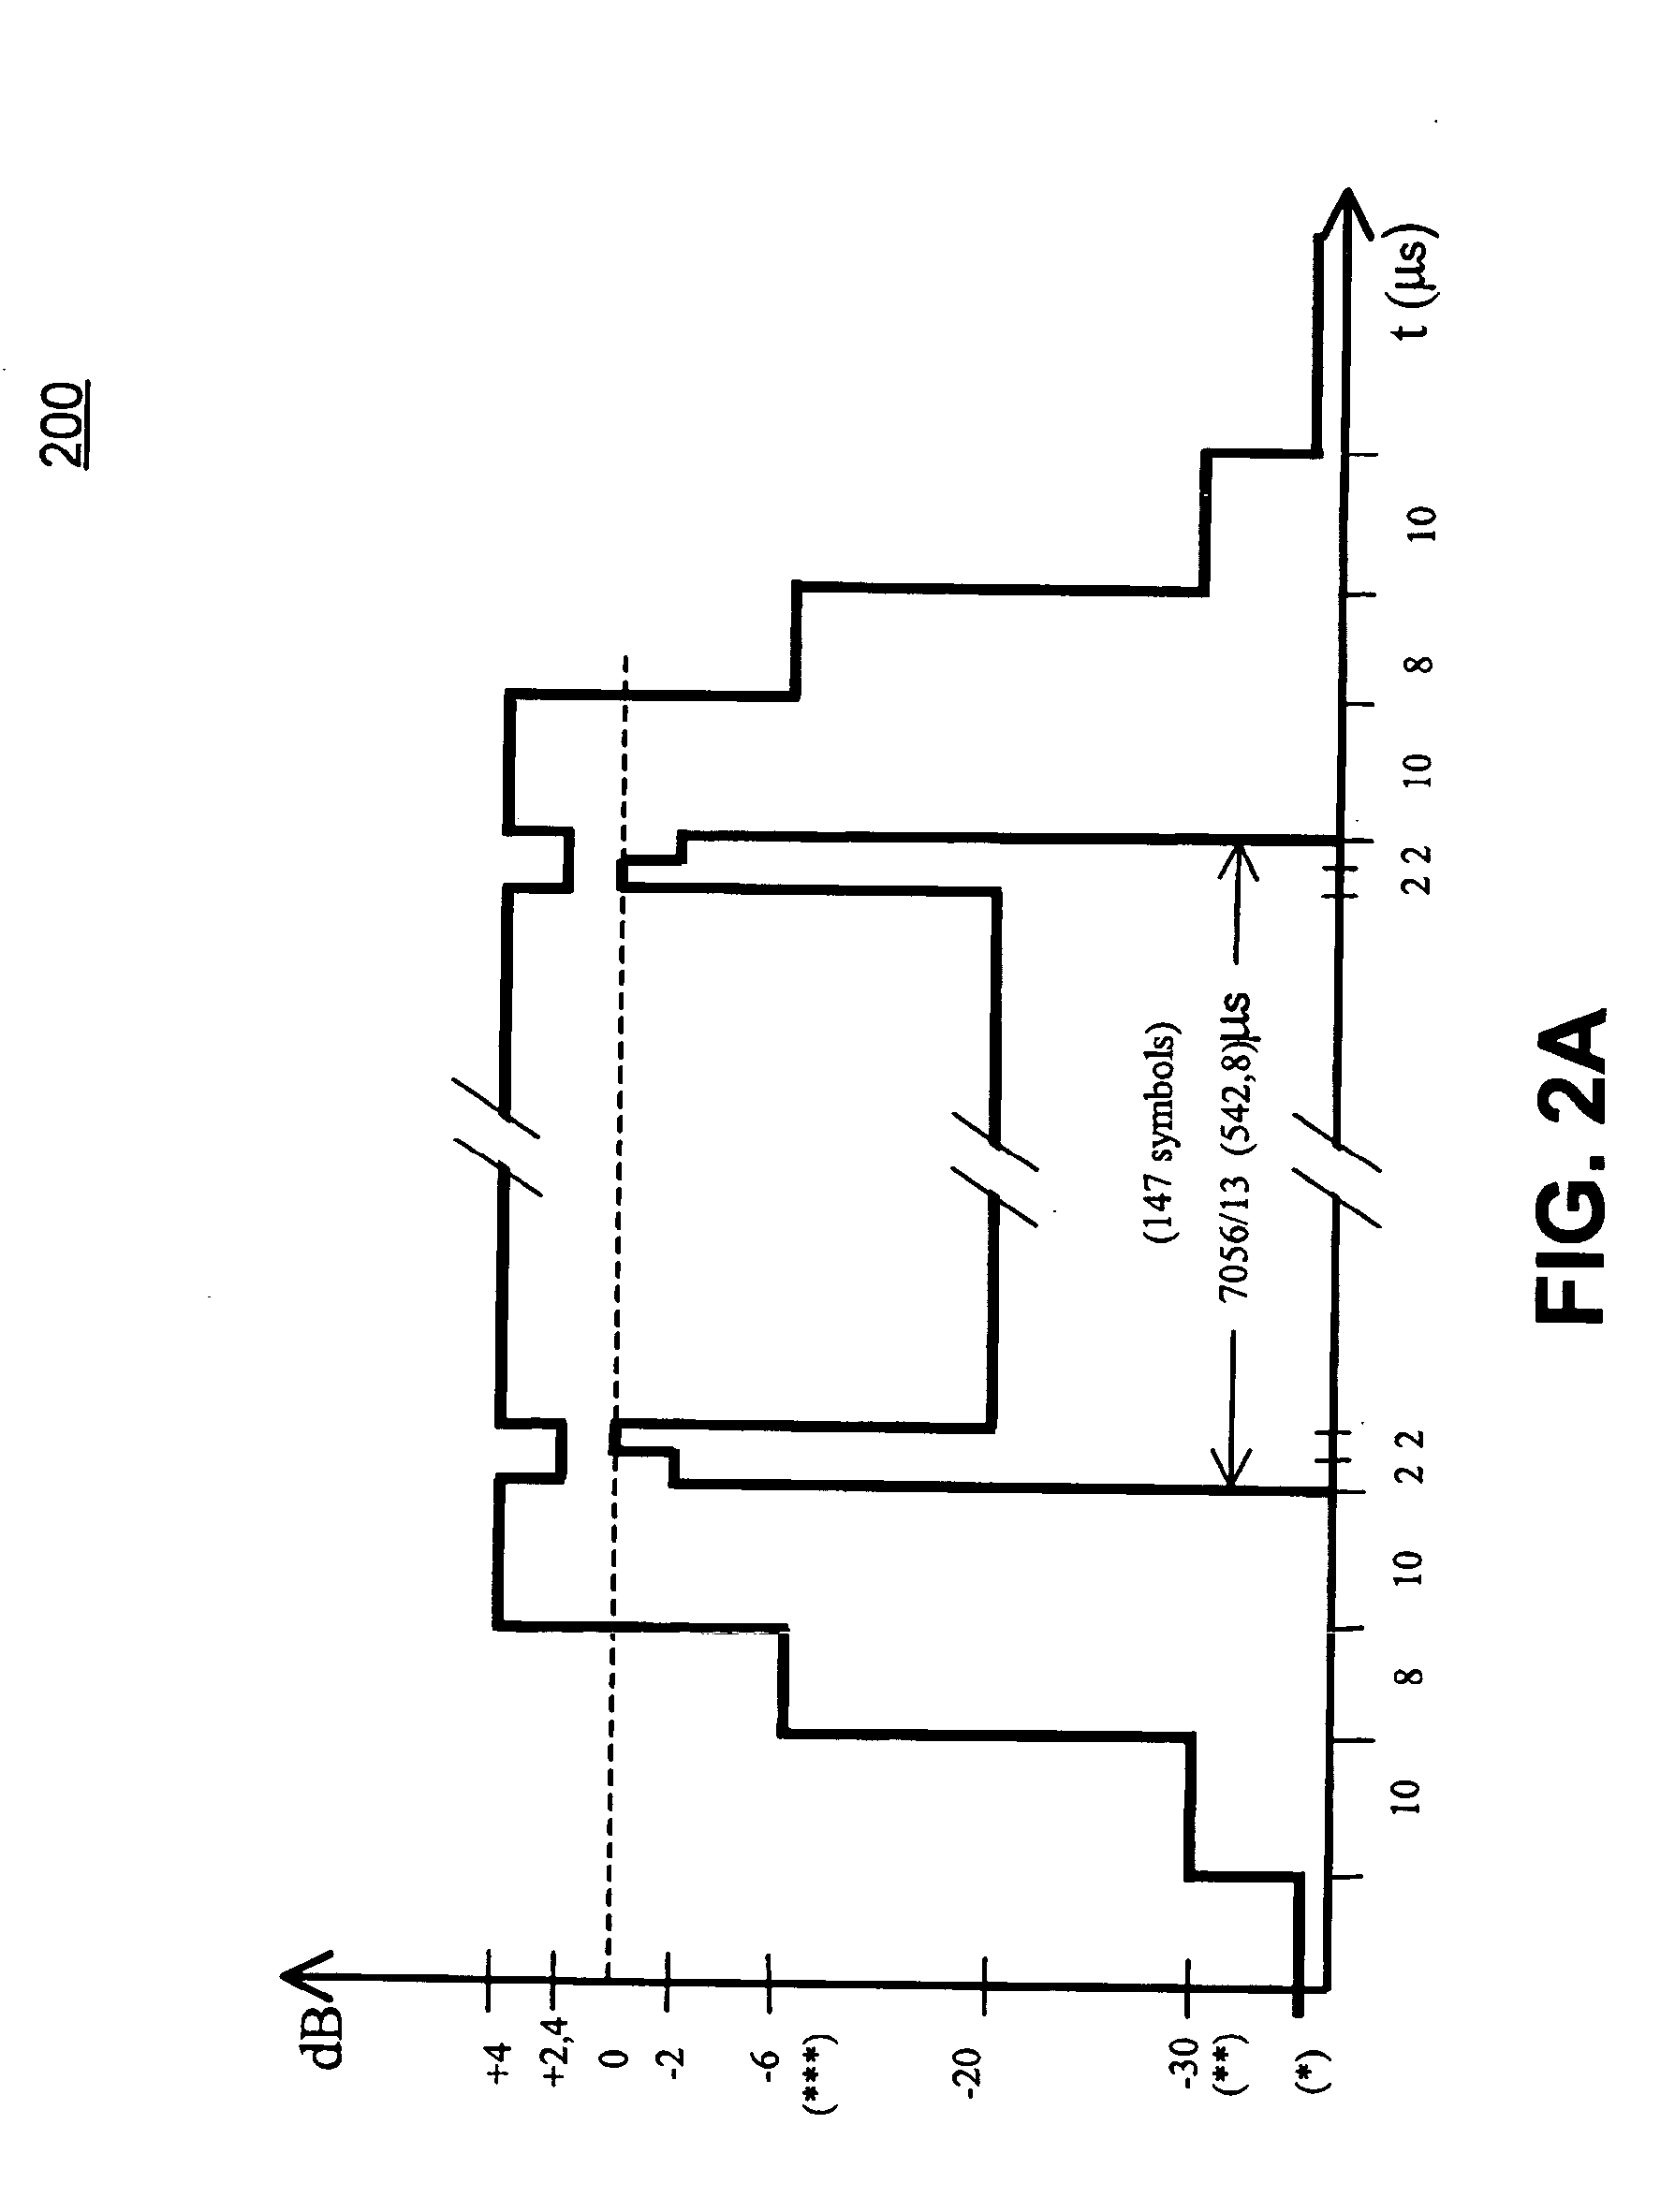 Amplifier predistortion and autocalibration method and apparatus